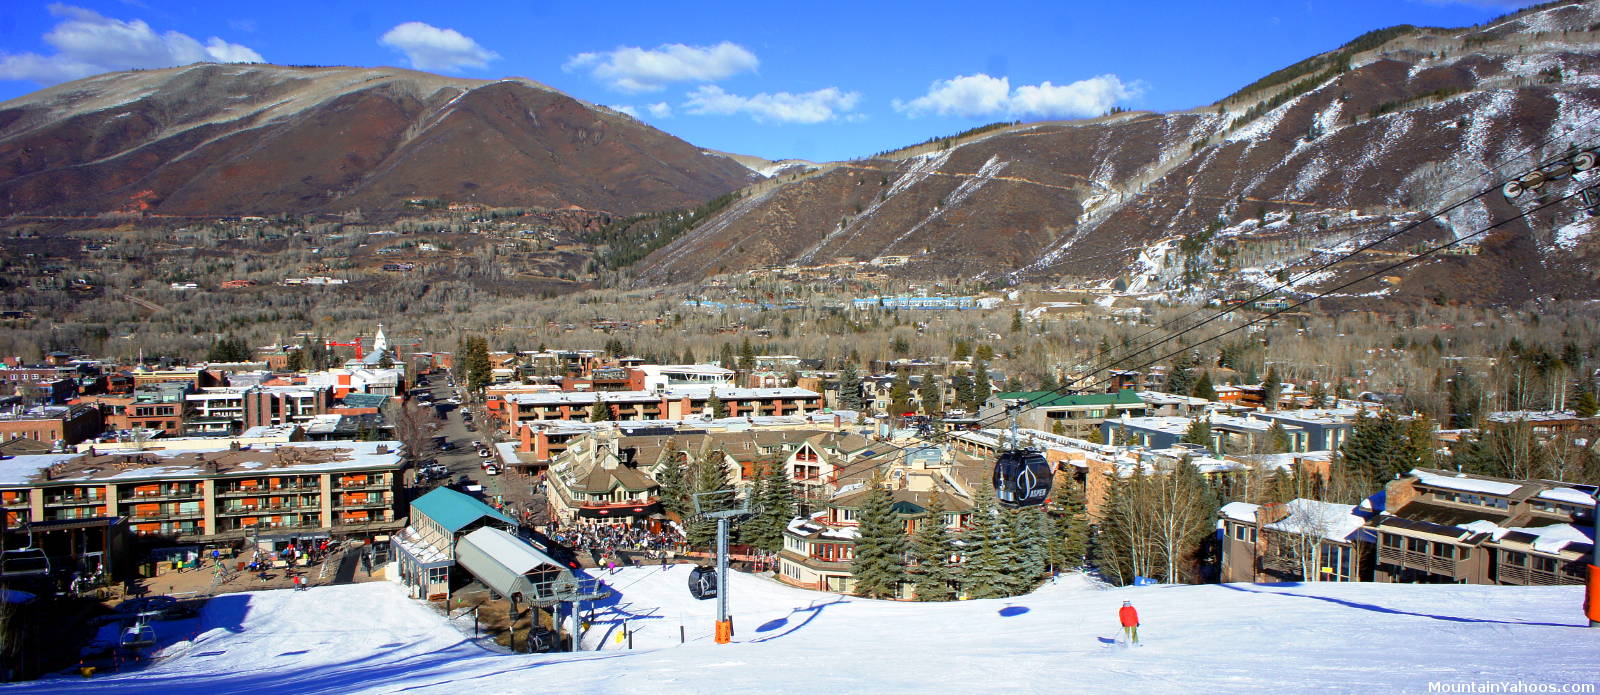 View of the base of Aspen Mountain